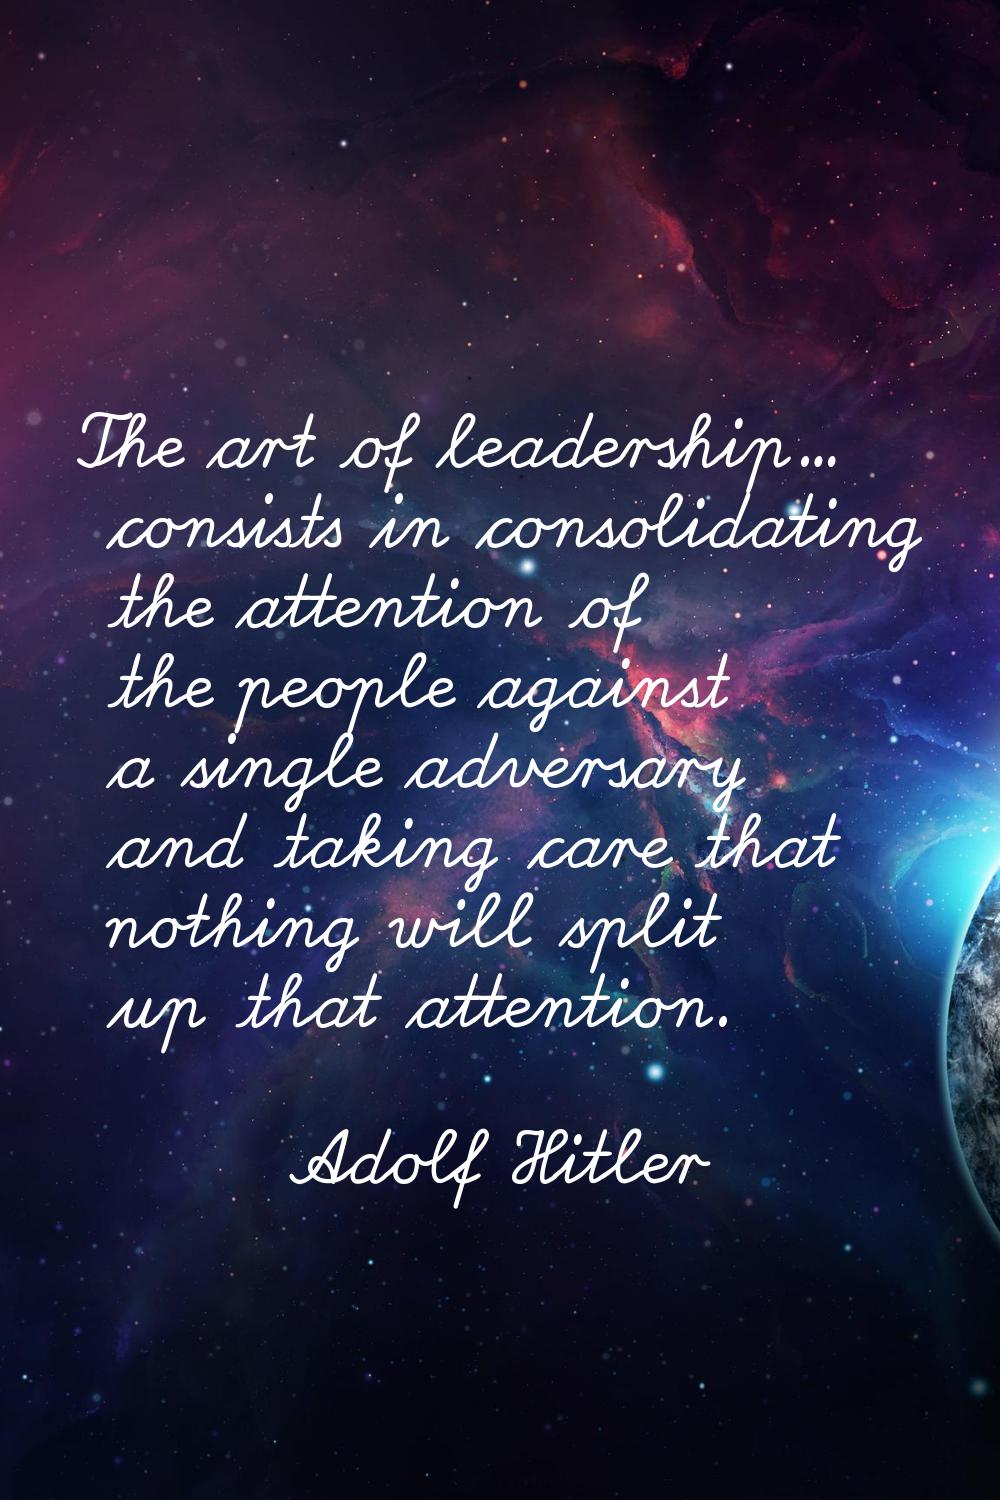 The art of leadership... consists in consolidating the attention of the people against a single adv